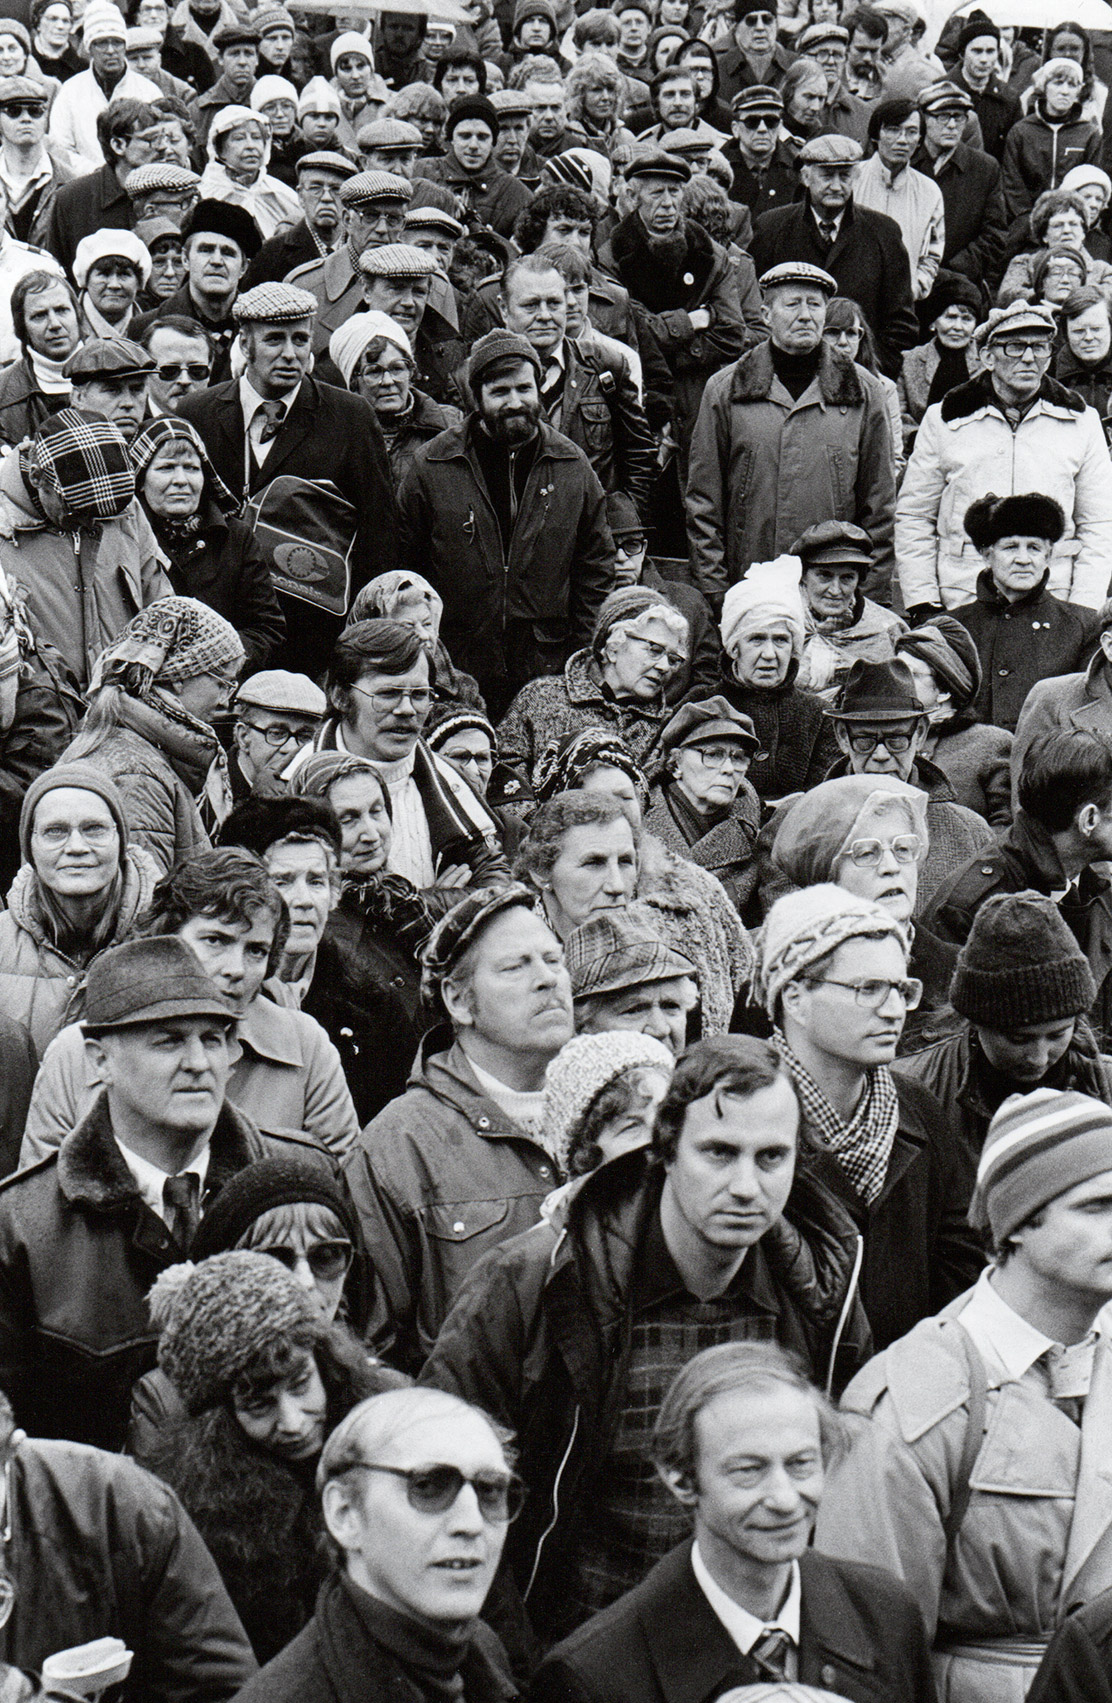 People in a crowd